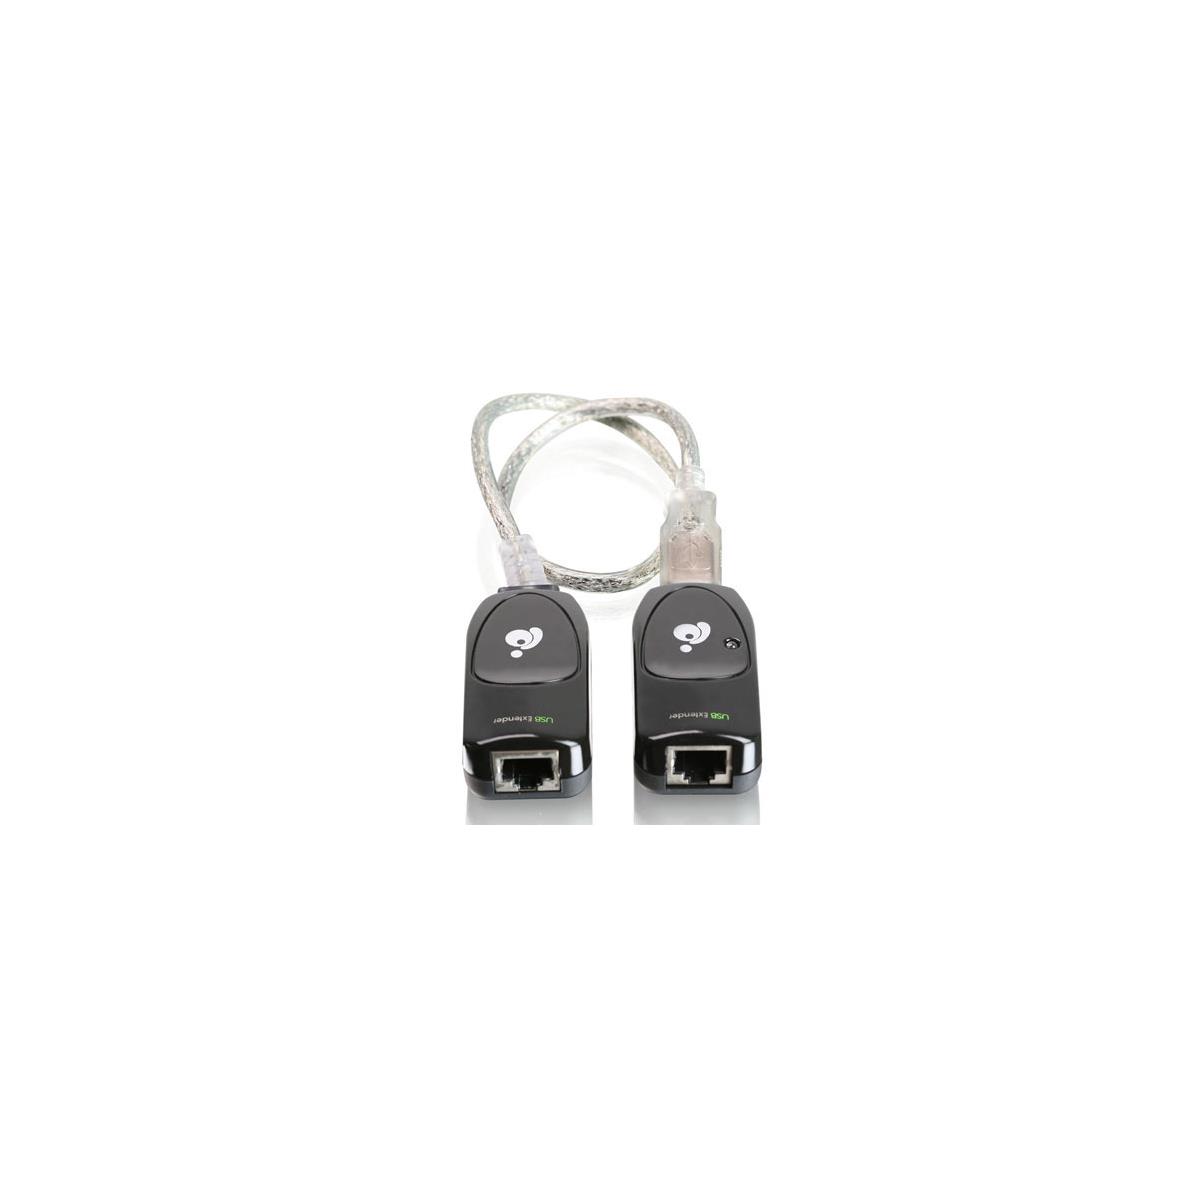 Photos - Other for Computer IOGEAR USB Ethernet Extender GUCE51 